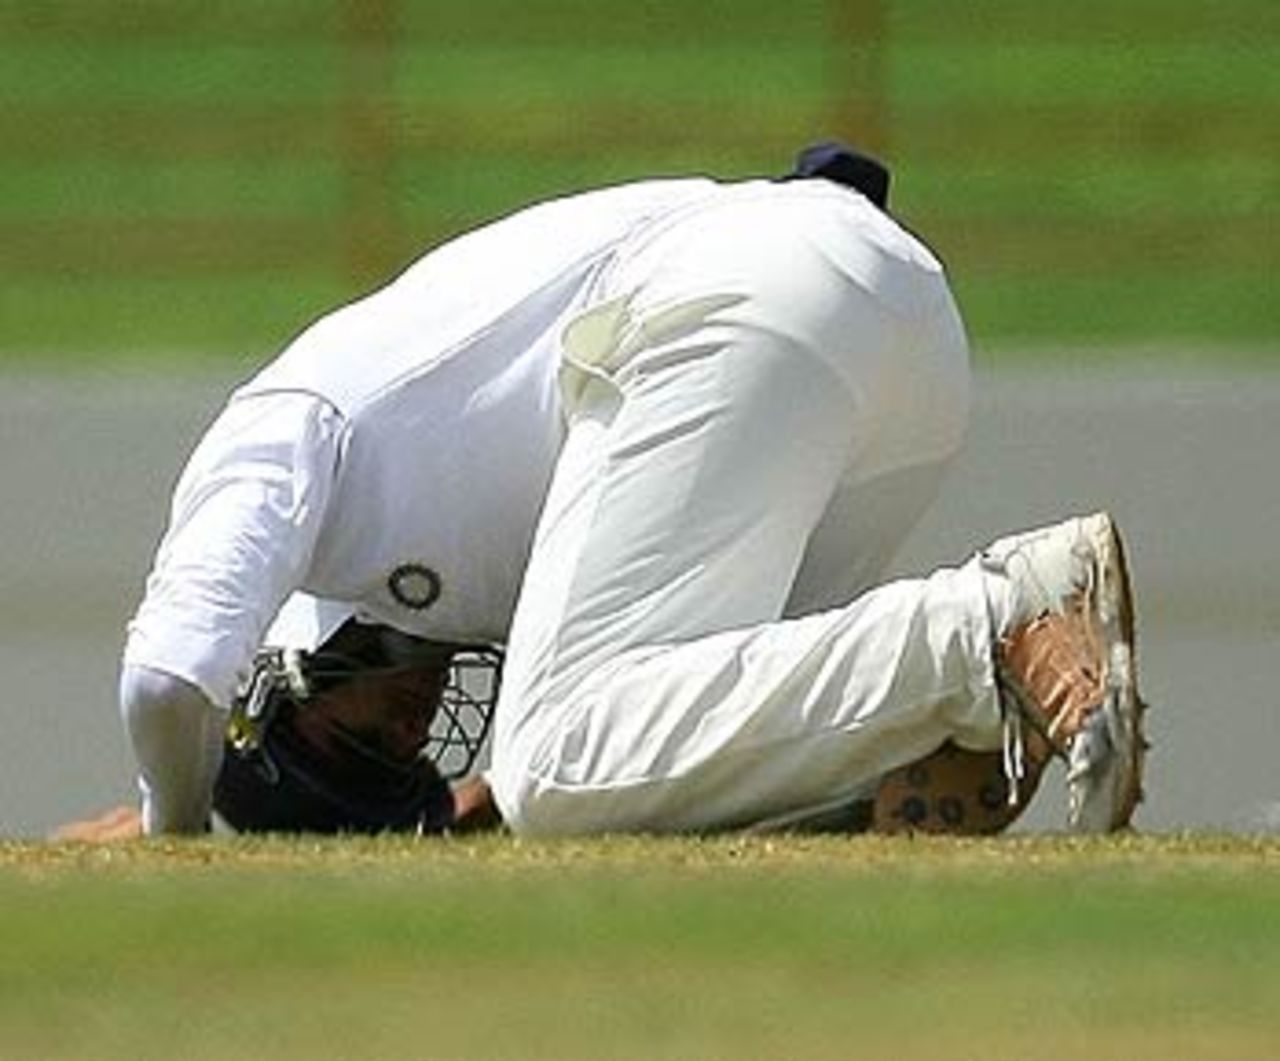 Yuvraj Singh reacts after receiving a painful blow at short leg,  West Indies v India, 2nd Test, St Lucia, 5th day, June 14, 2006